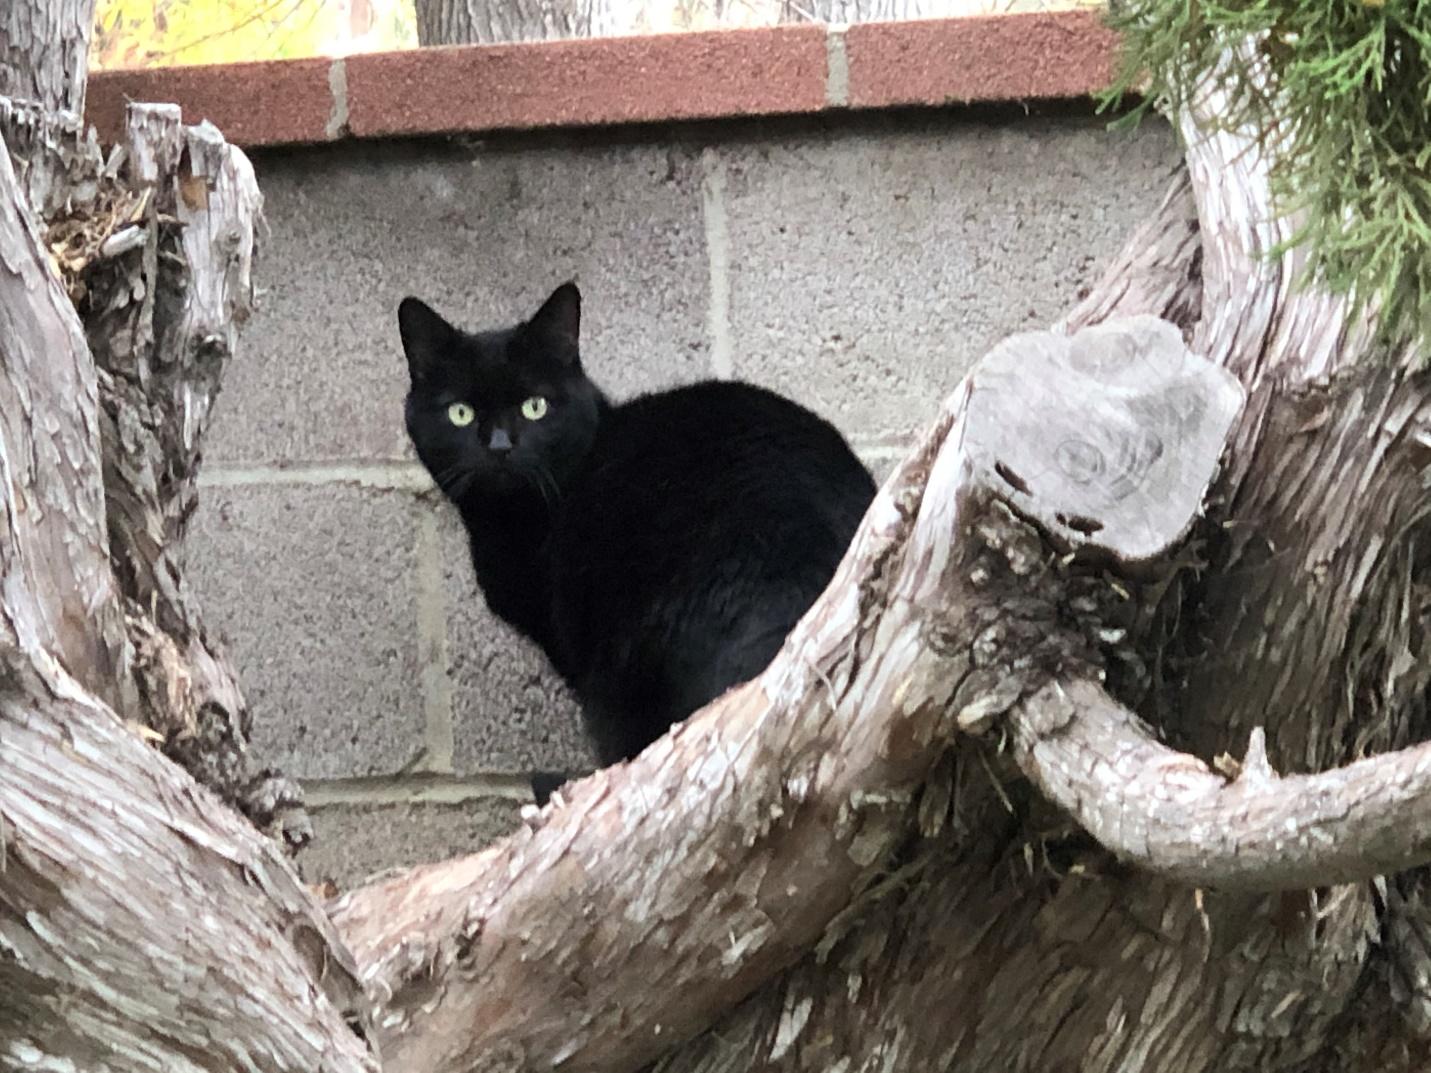 A black cat sitting on a tree branch

Description automatically generated